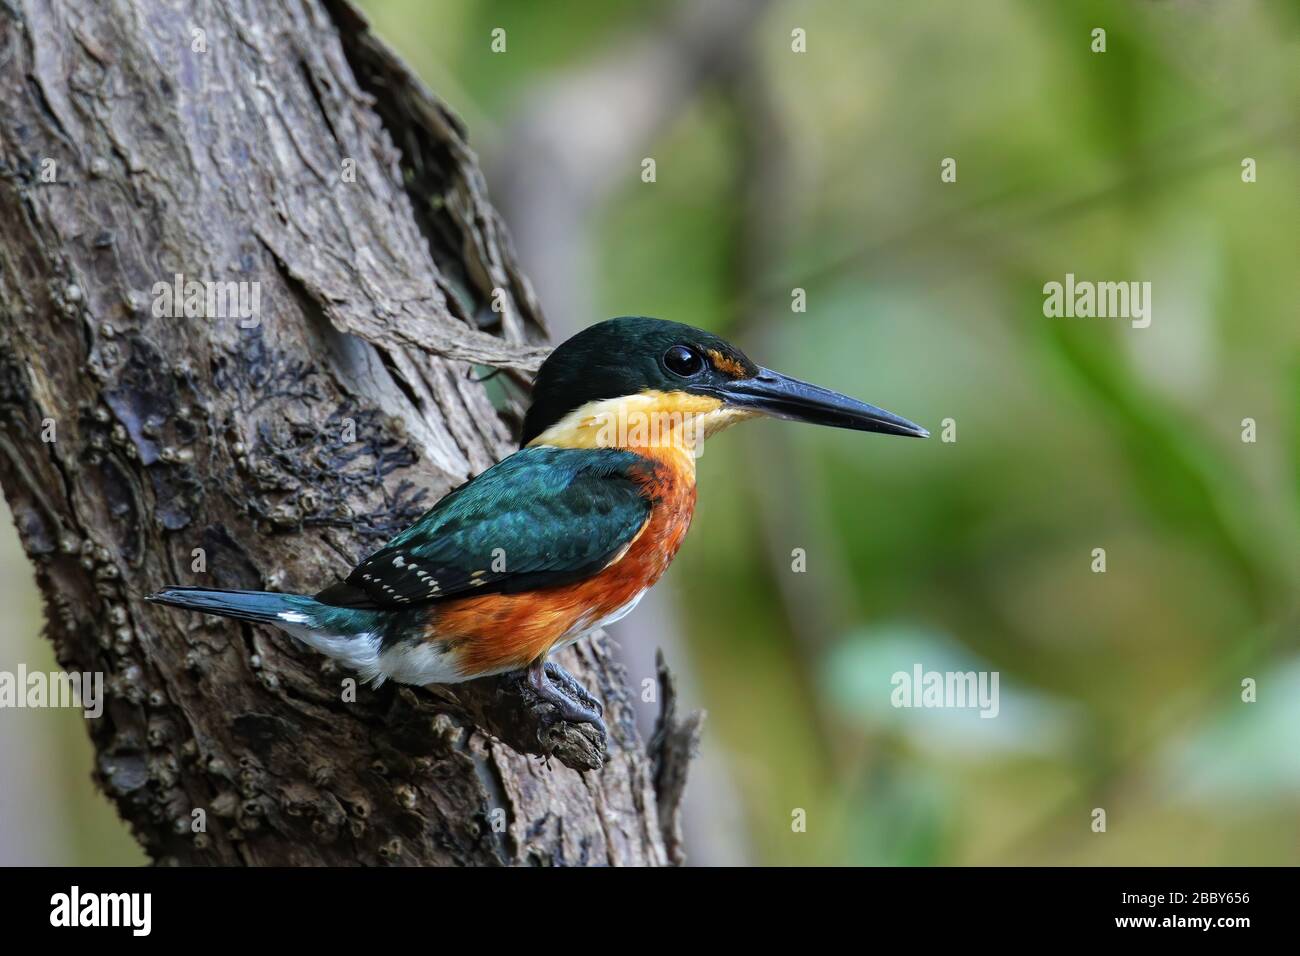 American pygmy kingfisher (Chloroceryle aenea) perched on a stick, Costa Rica Stock Photo